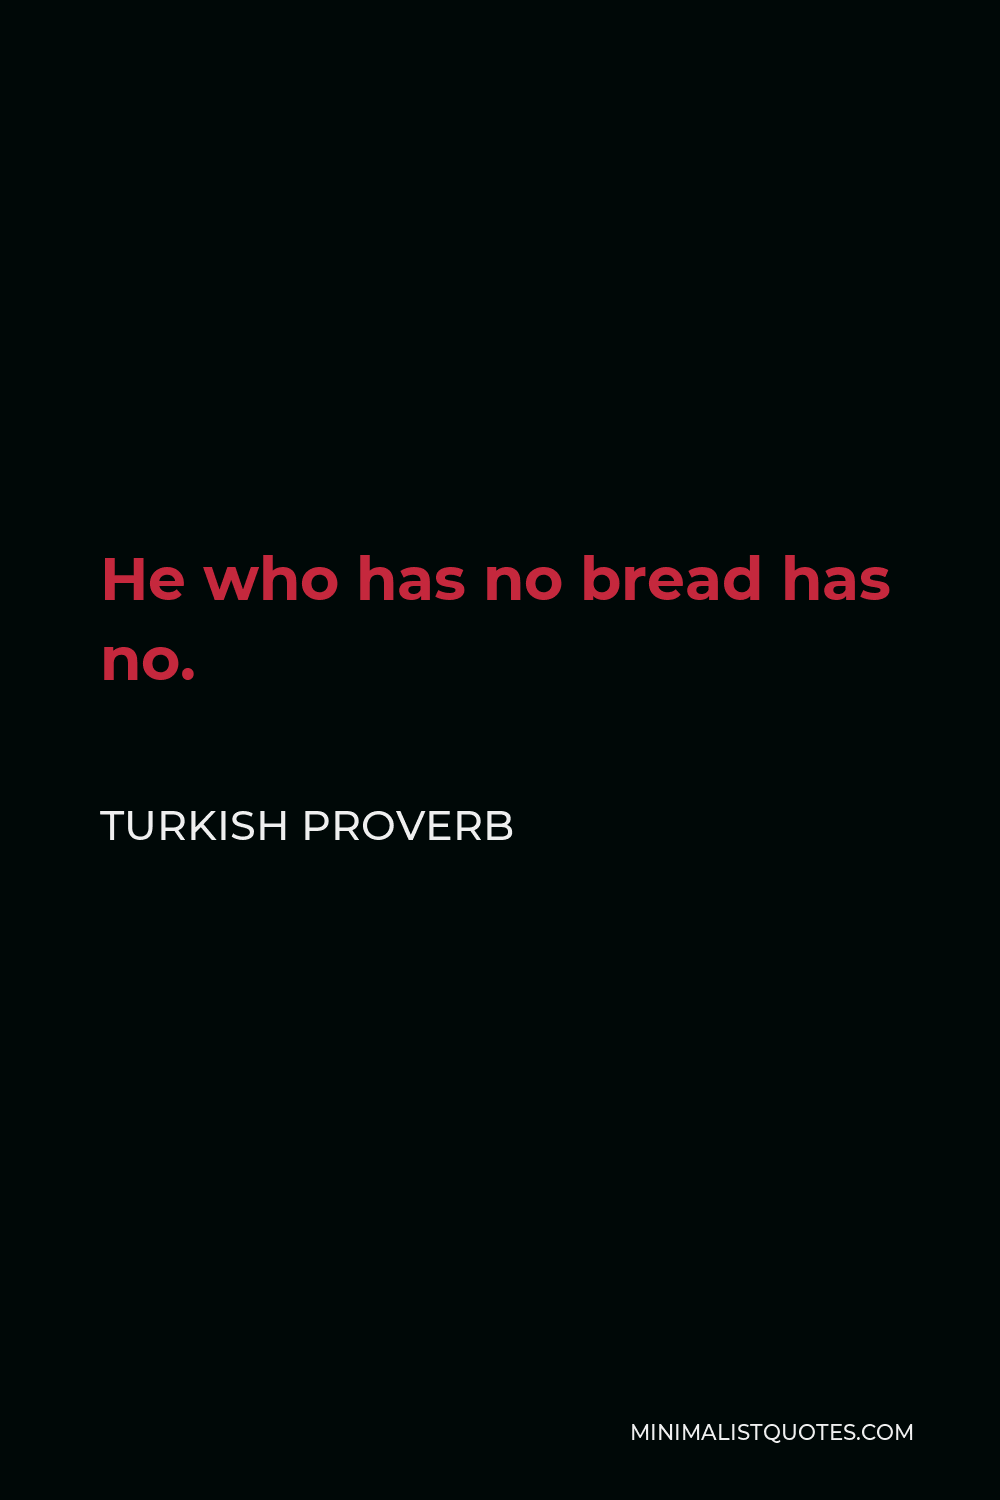 Turkish Proverb Quote - He who has no bread has no authority